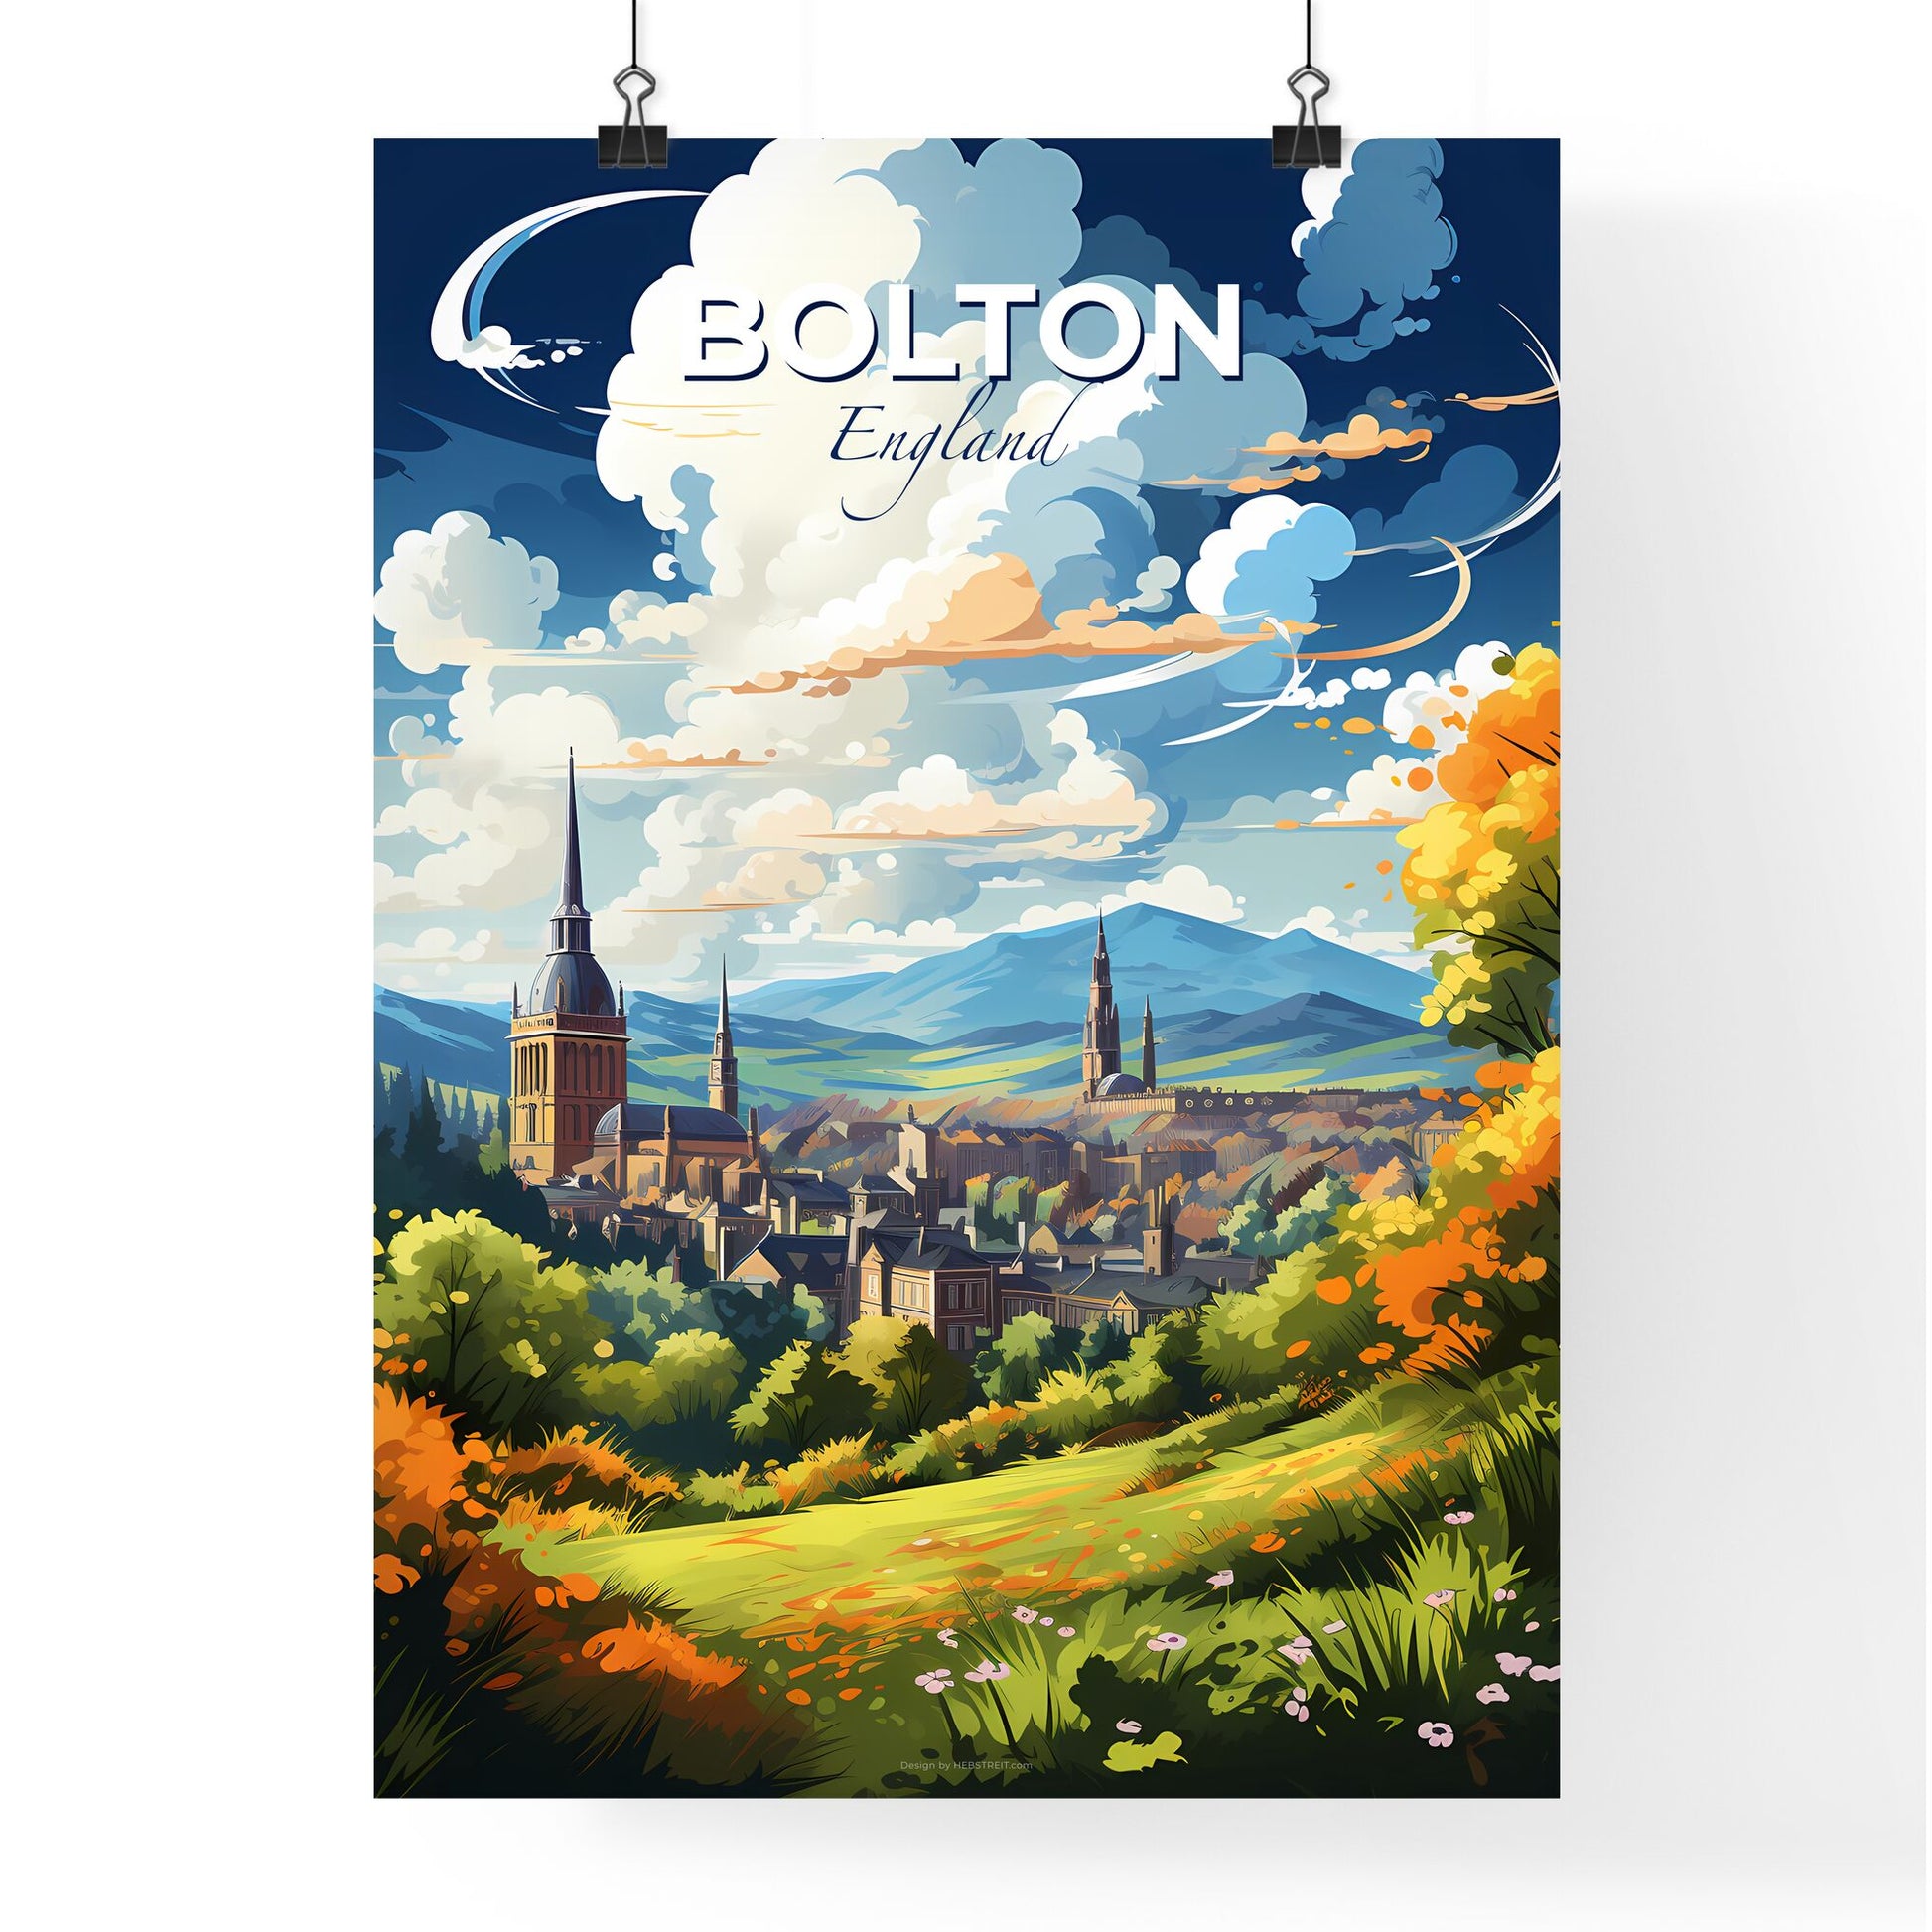 Bolton England Skyline - A Landscape With Trees And Buildings - Customizable Travel Gift Default Title